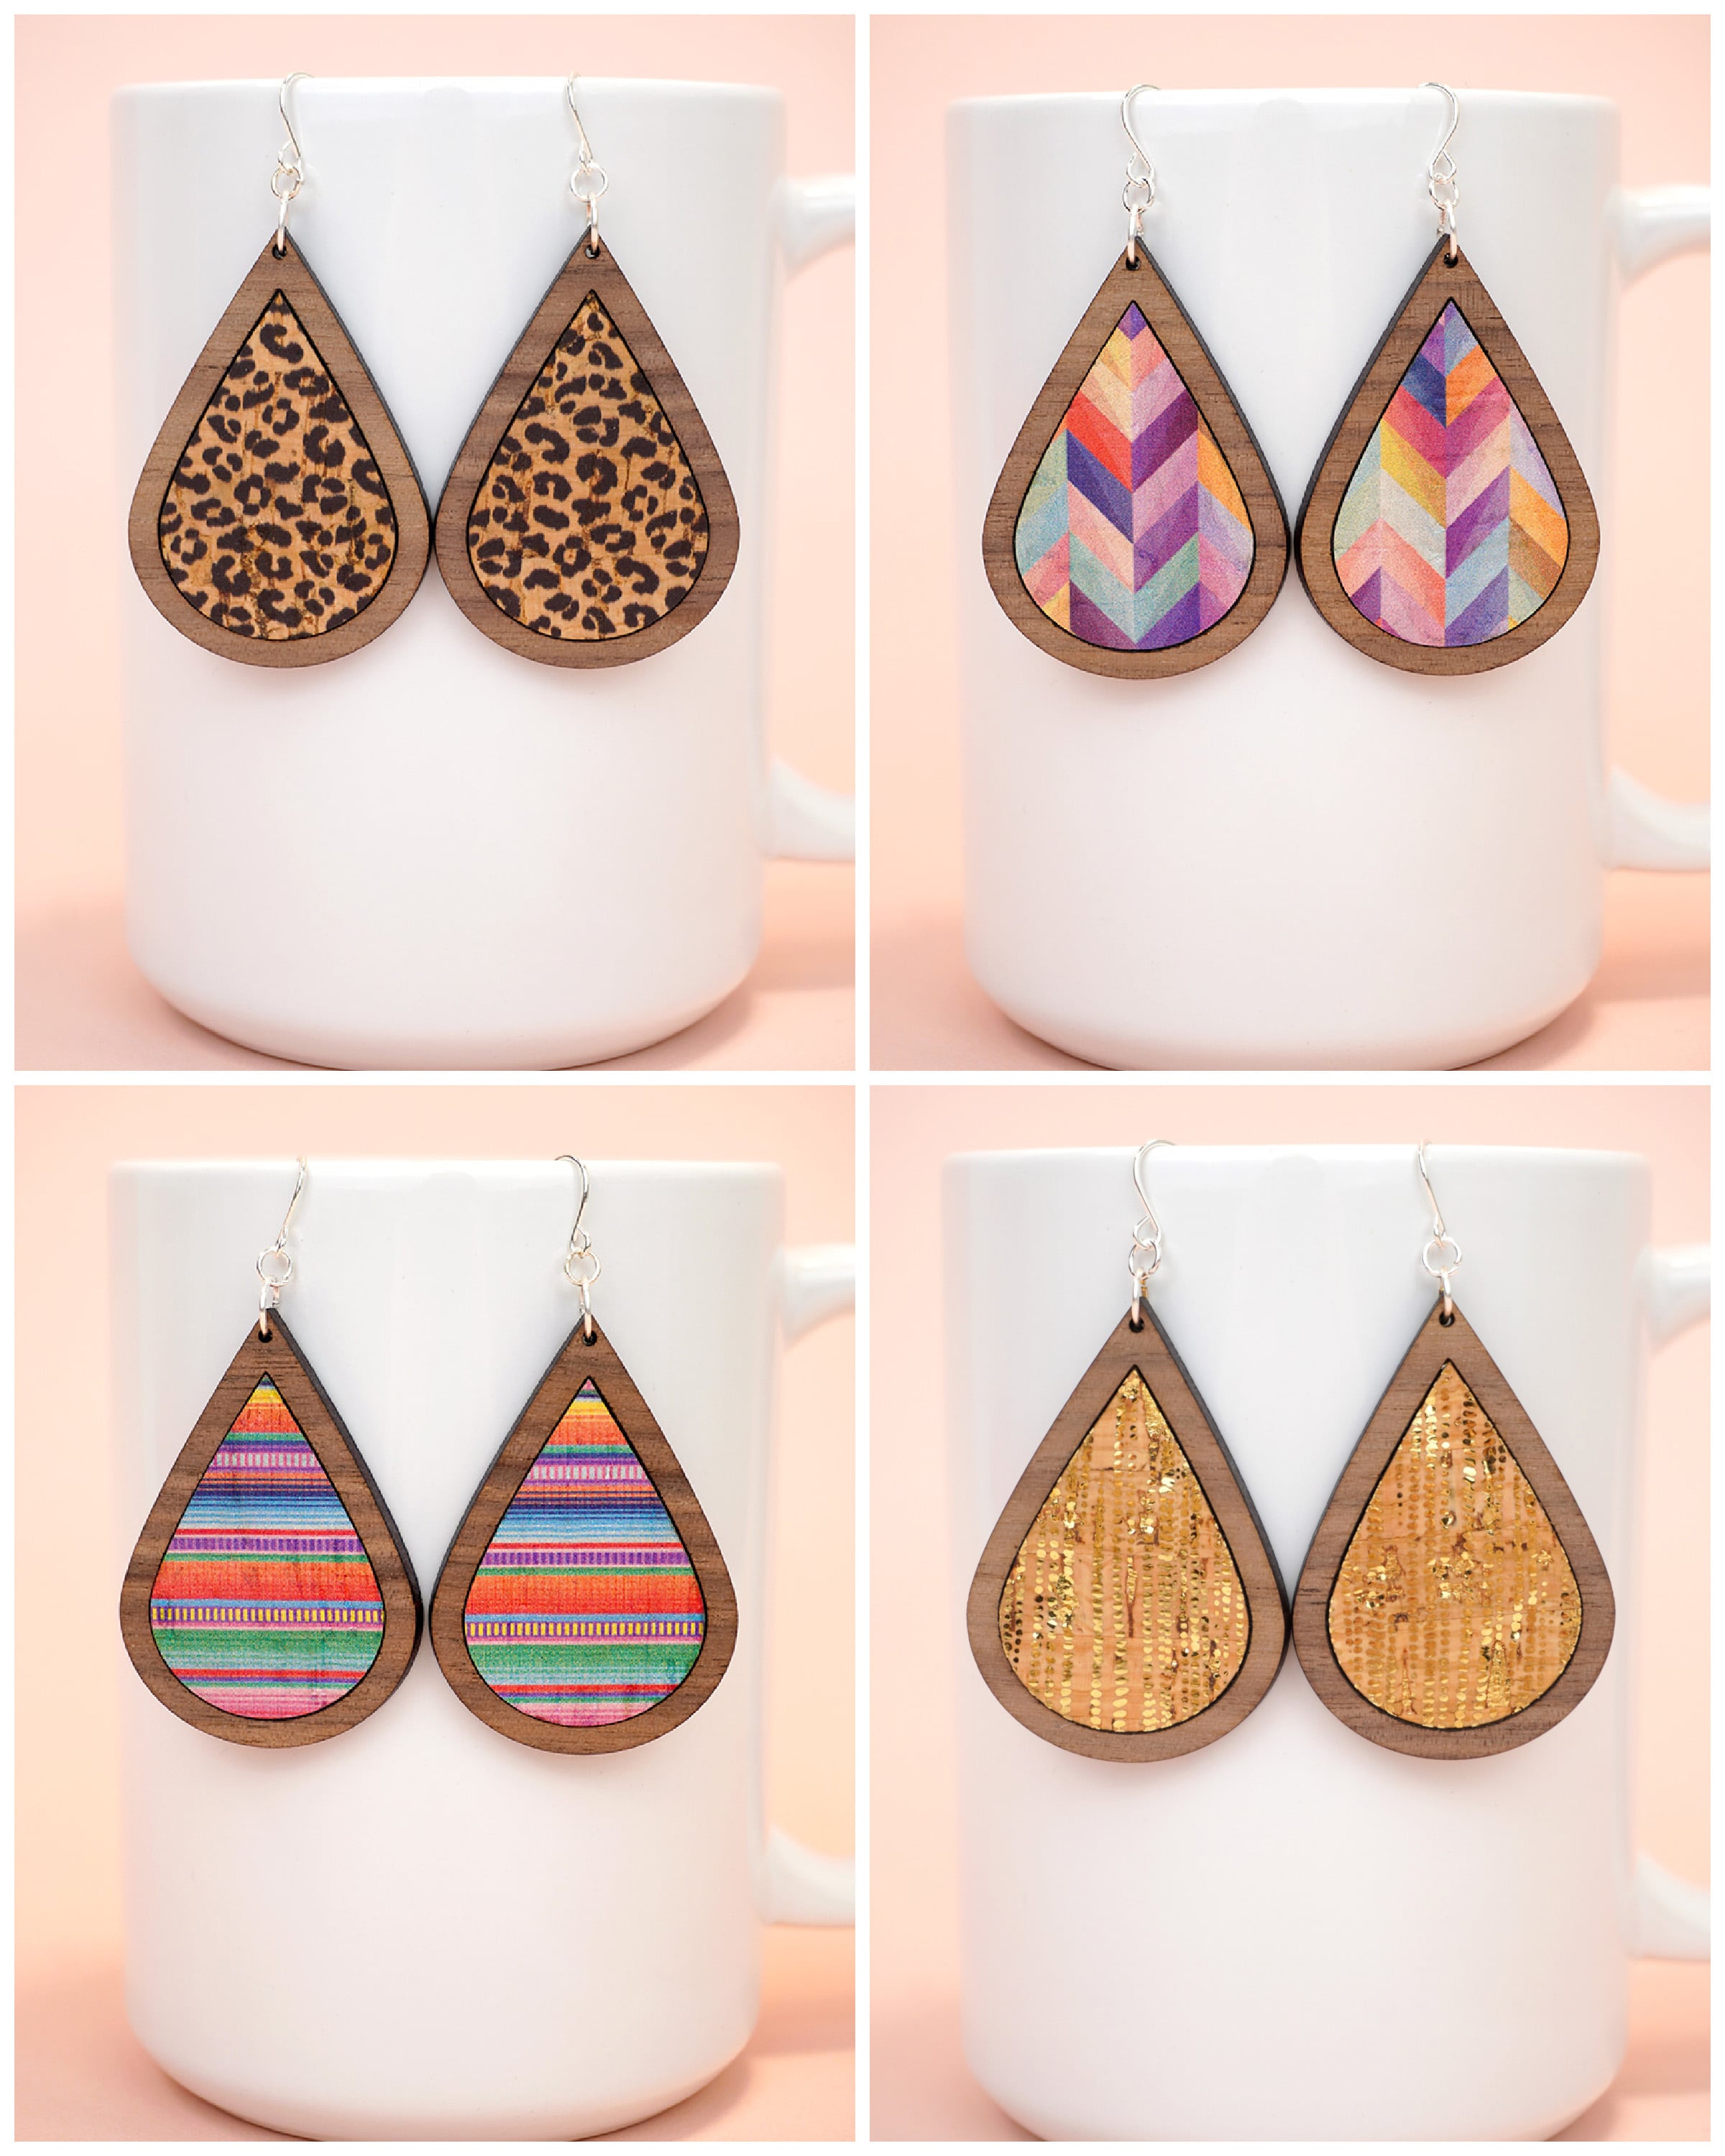 Collage of four styles of cork and laser cut wood earrings - leopard print, colorful herringbone, metallic gold, and colorful serape print. 